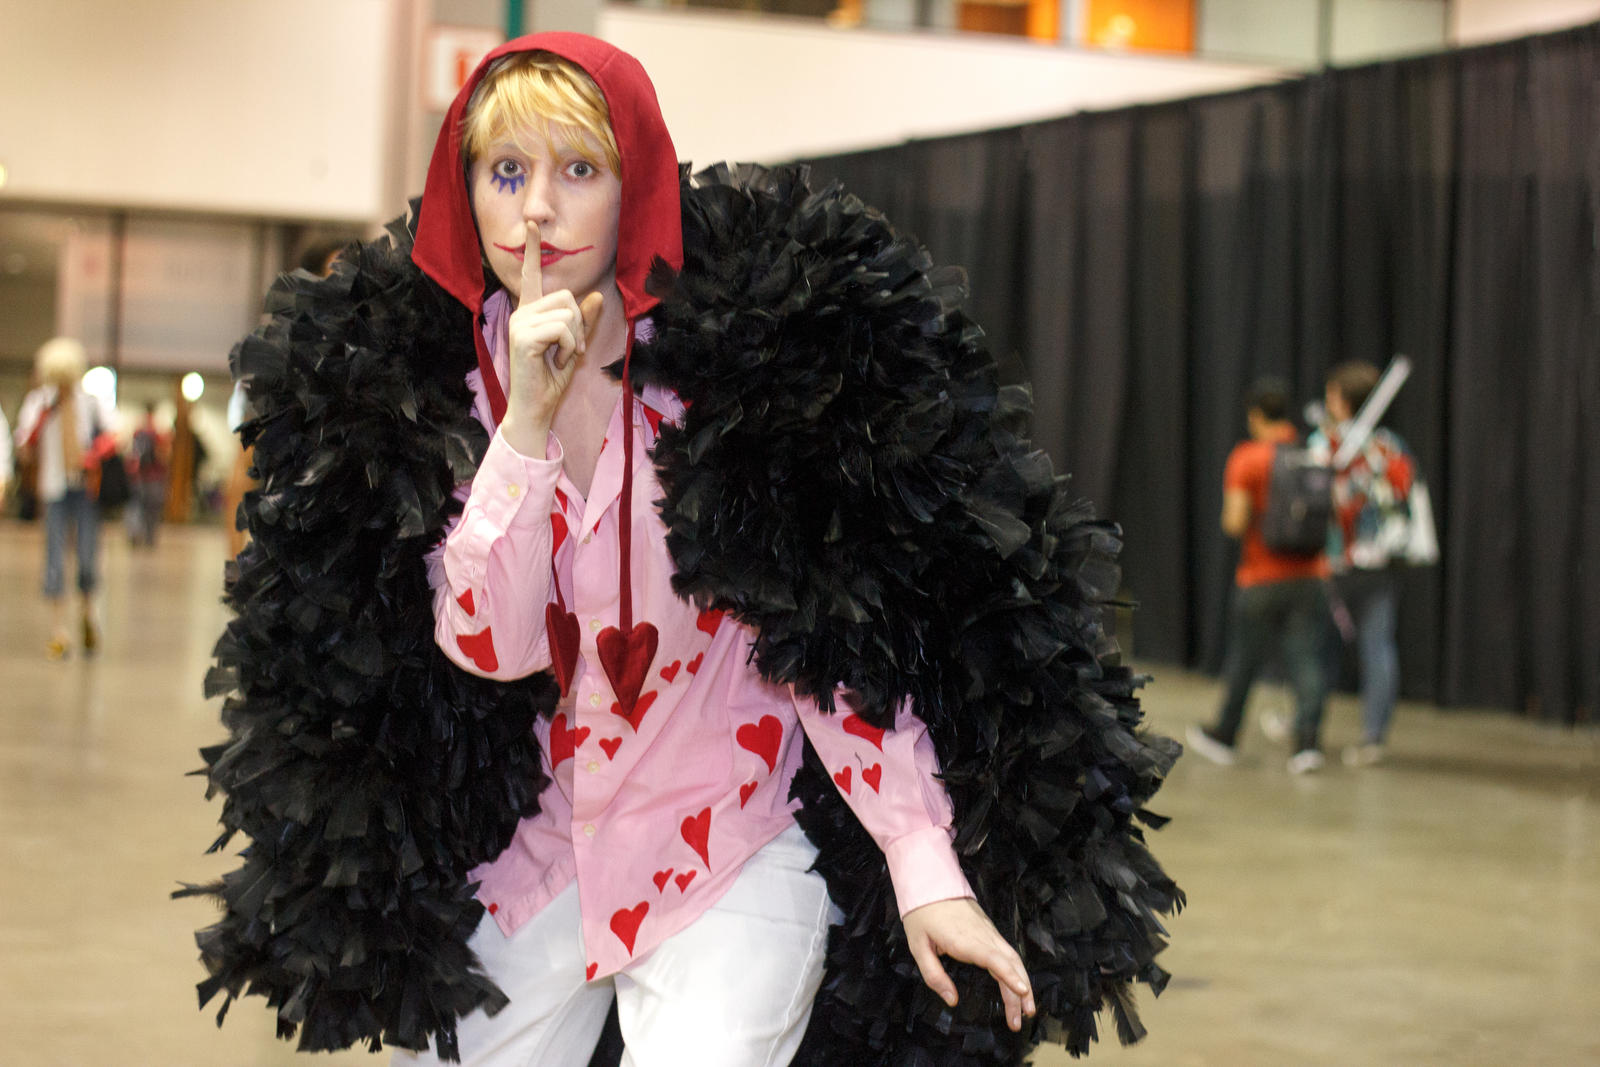 Corazon From One Piece At Anime Expo 15 By Mrjoshbox On Deviantart